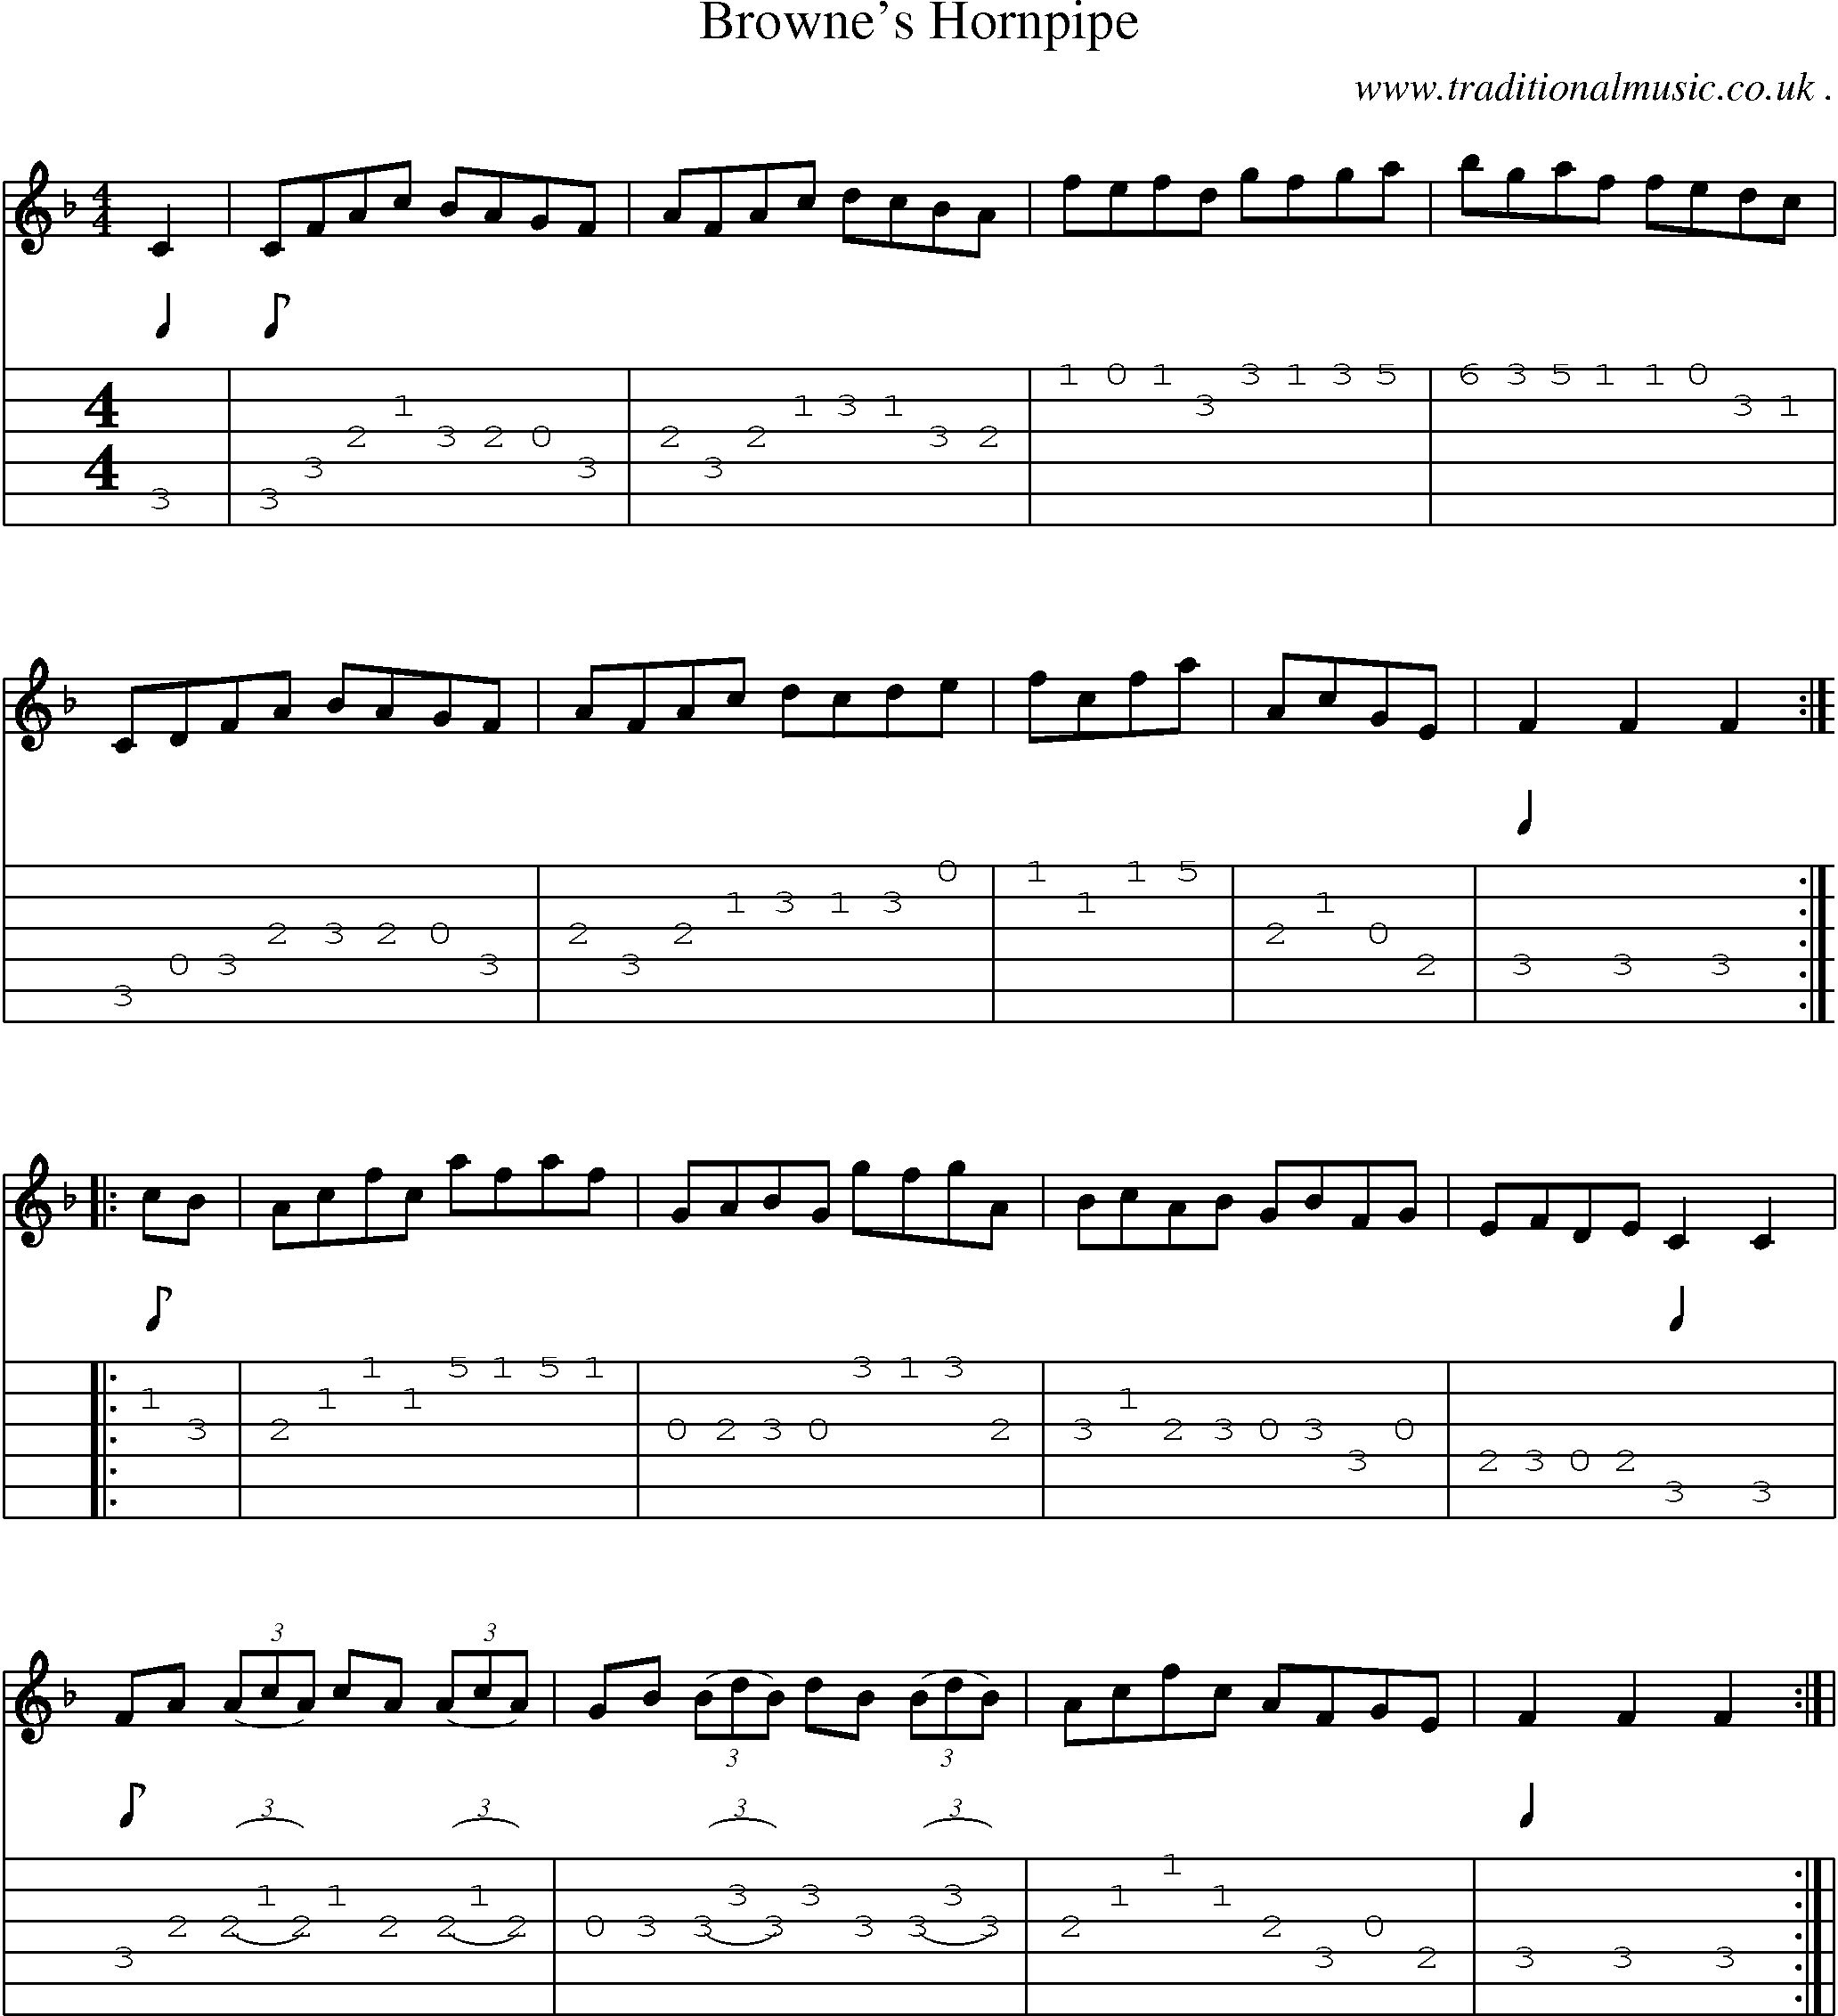 Sheet-Music and Guitar Tabs for Brownes Hornpipe